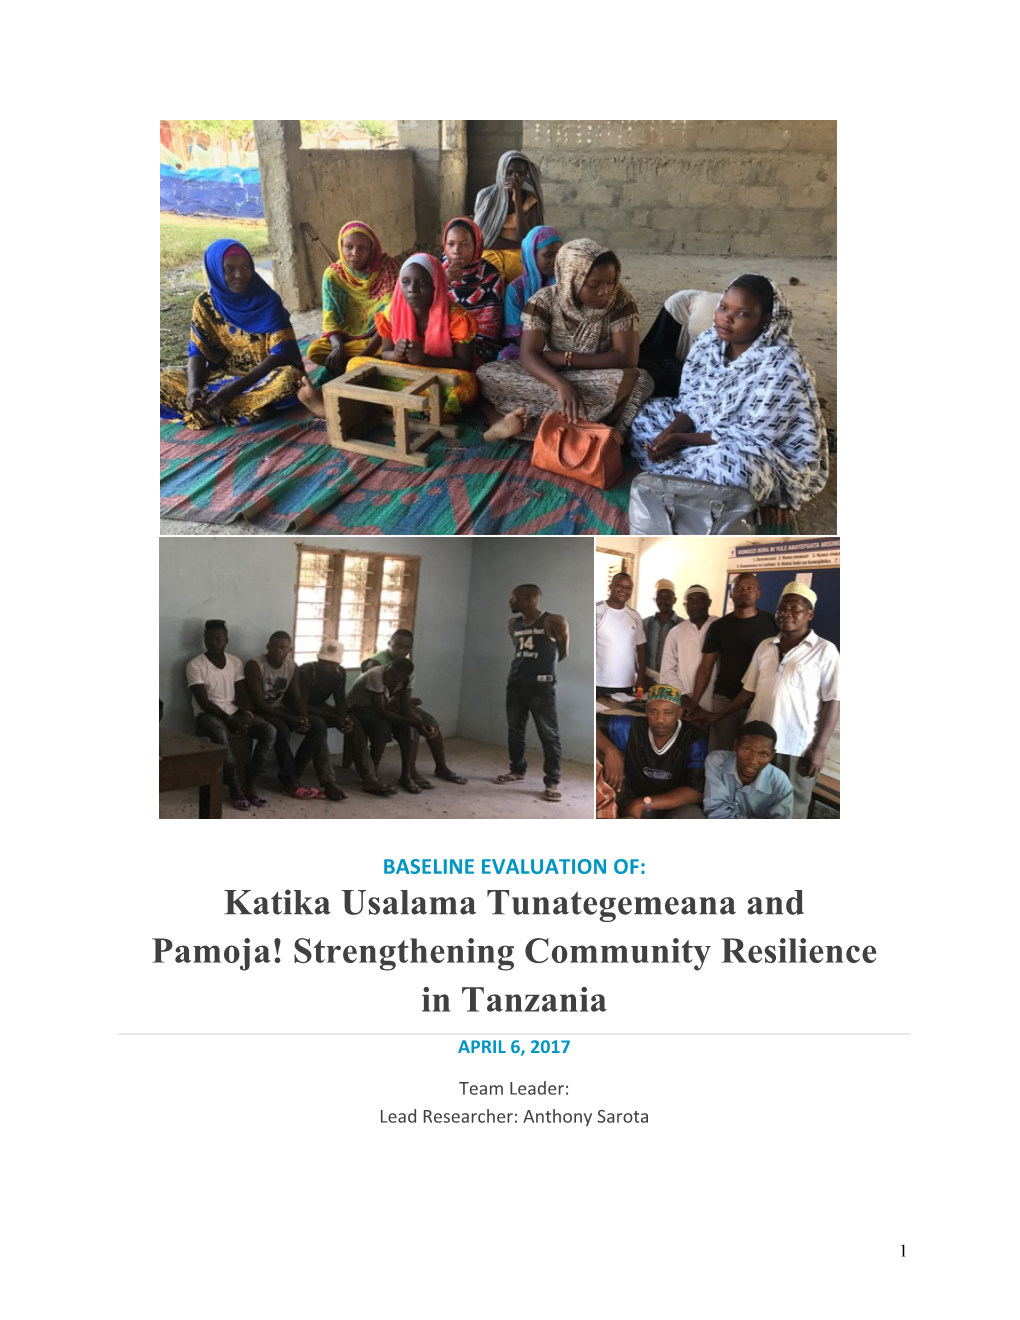 Strengthening Community Resilience in Tanzania APRIL 6, 2017